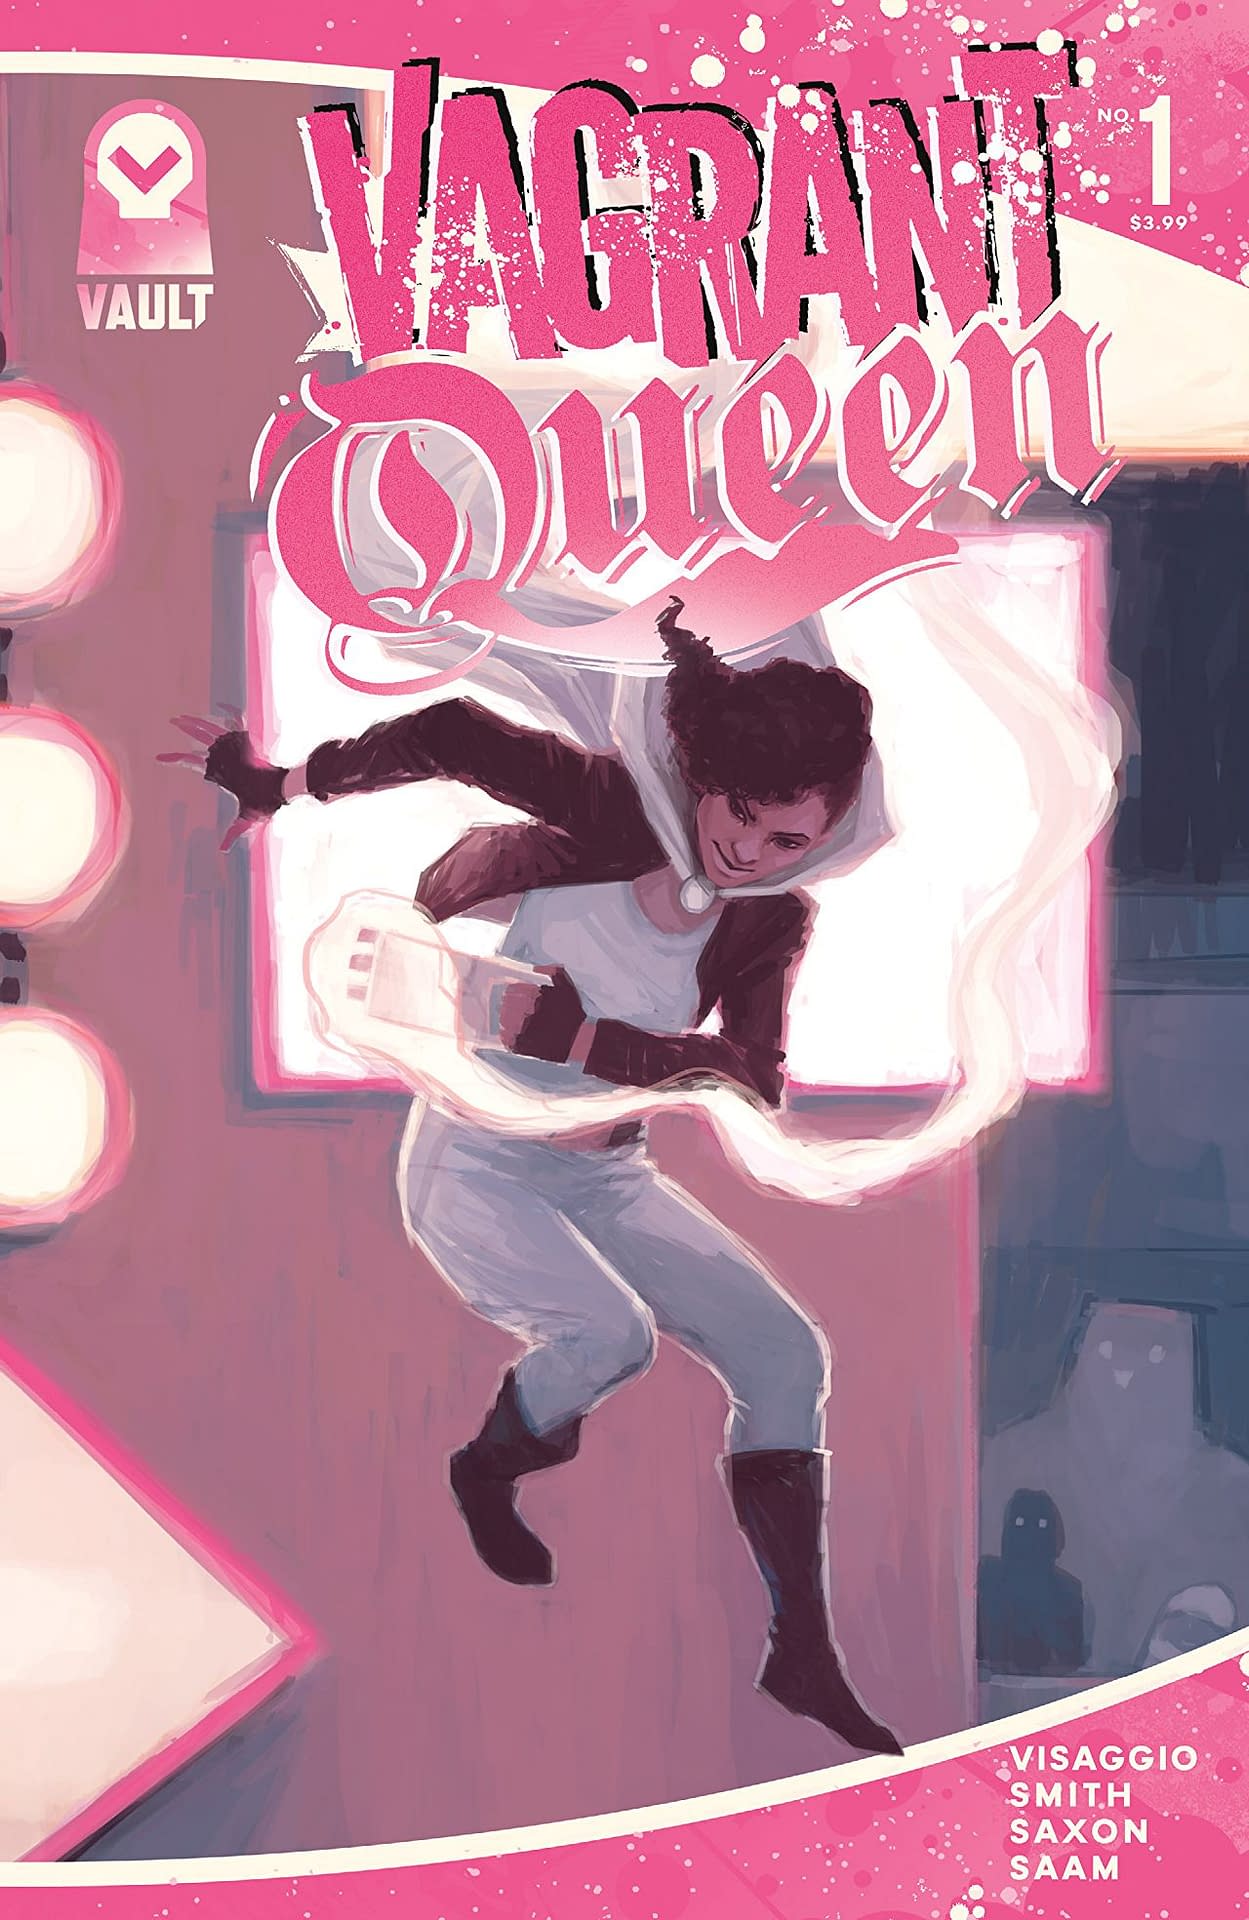 SYFY Bringing Space Opera 'Vagrant Queen' to Life in 2020